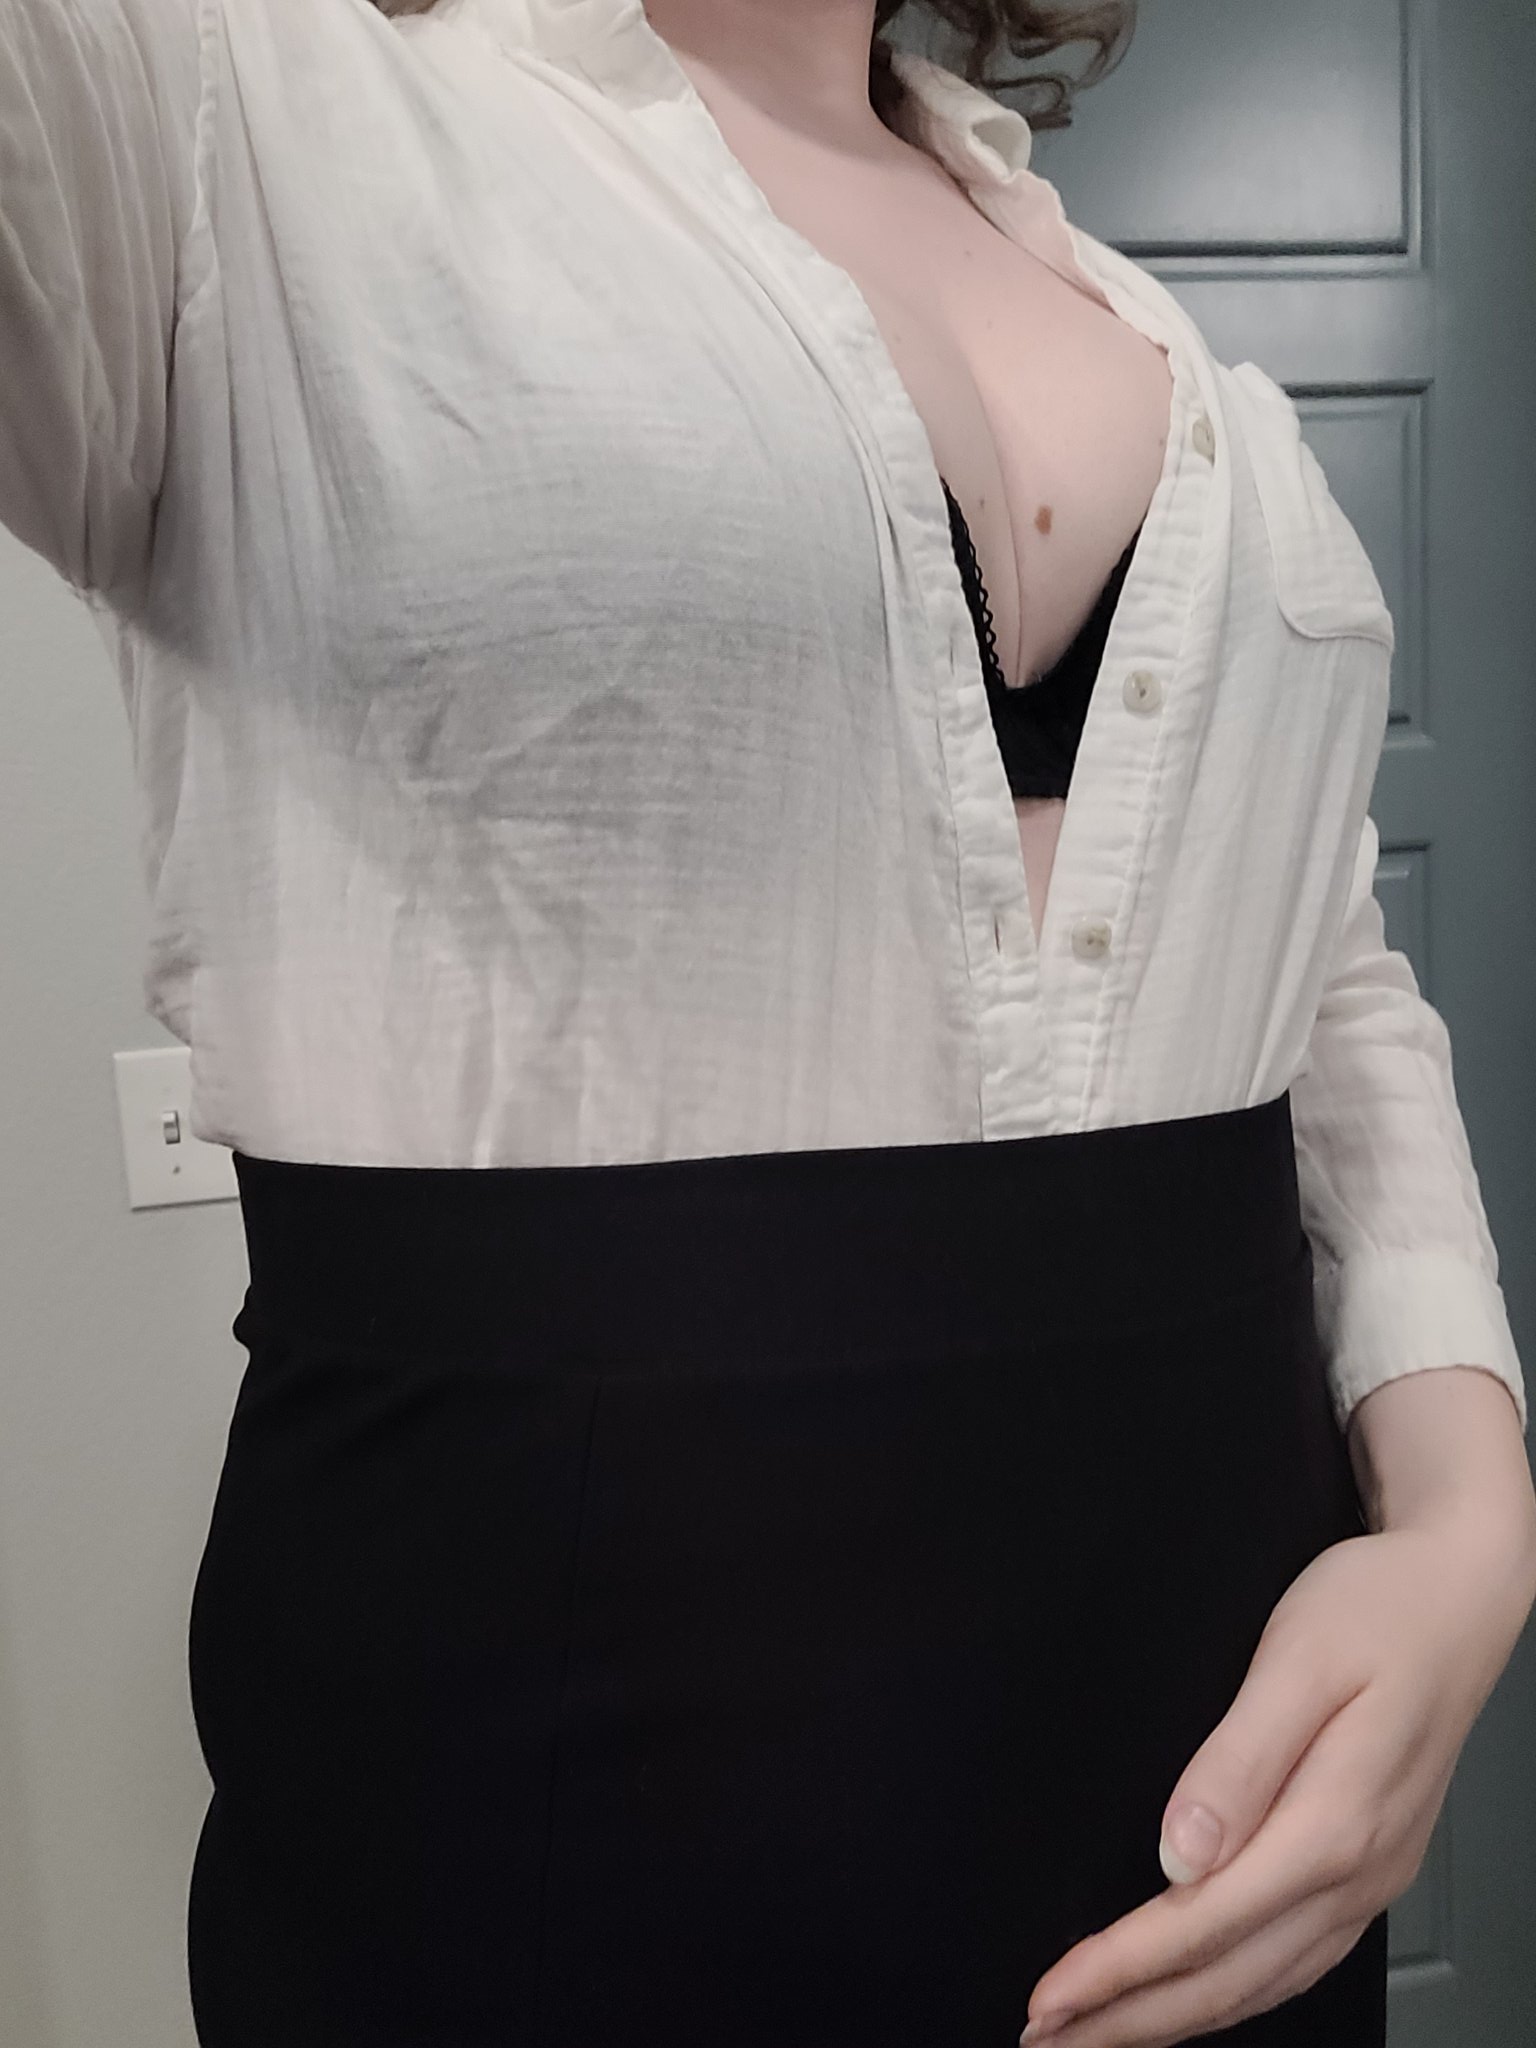 💜 Salvia Carhina 💜 على X: Busty Secretary was the LAST thing I thought I  could pull off, but  / X